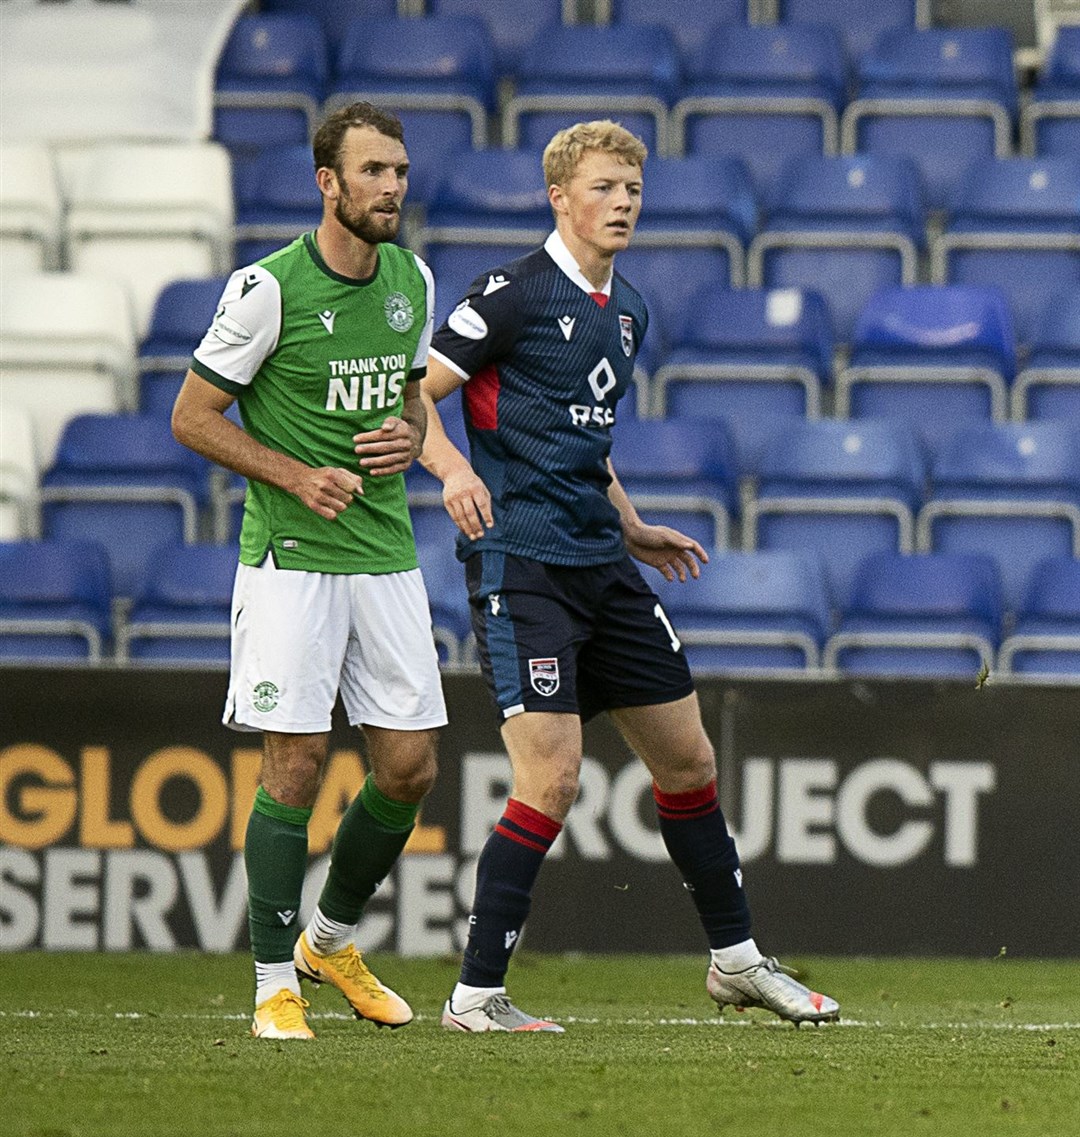 Picture - Ken Macpherson, Inverness. Ross County(0) v Hibs(0). 17.10.20. Ross County's Tom Grivosti made a welcome return from injury.